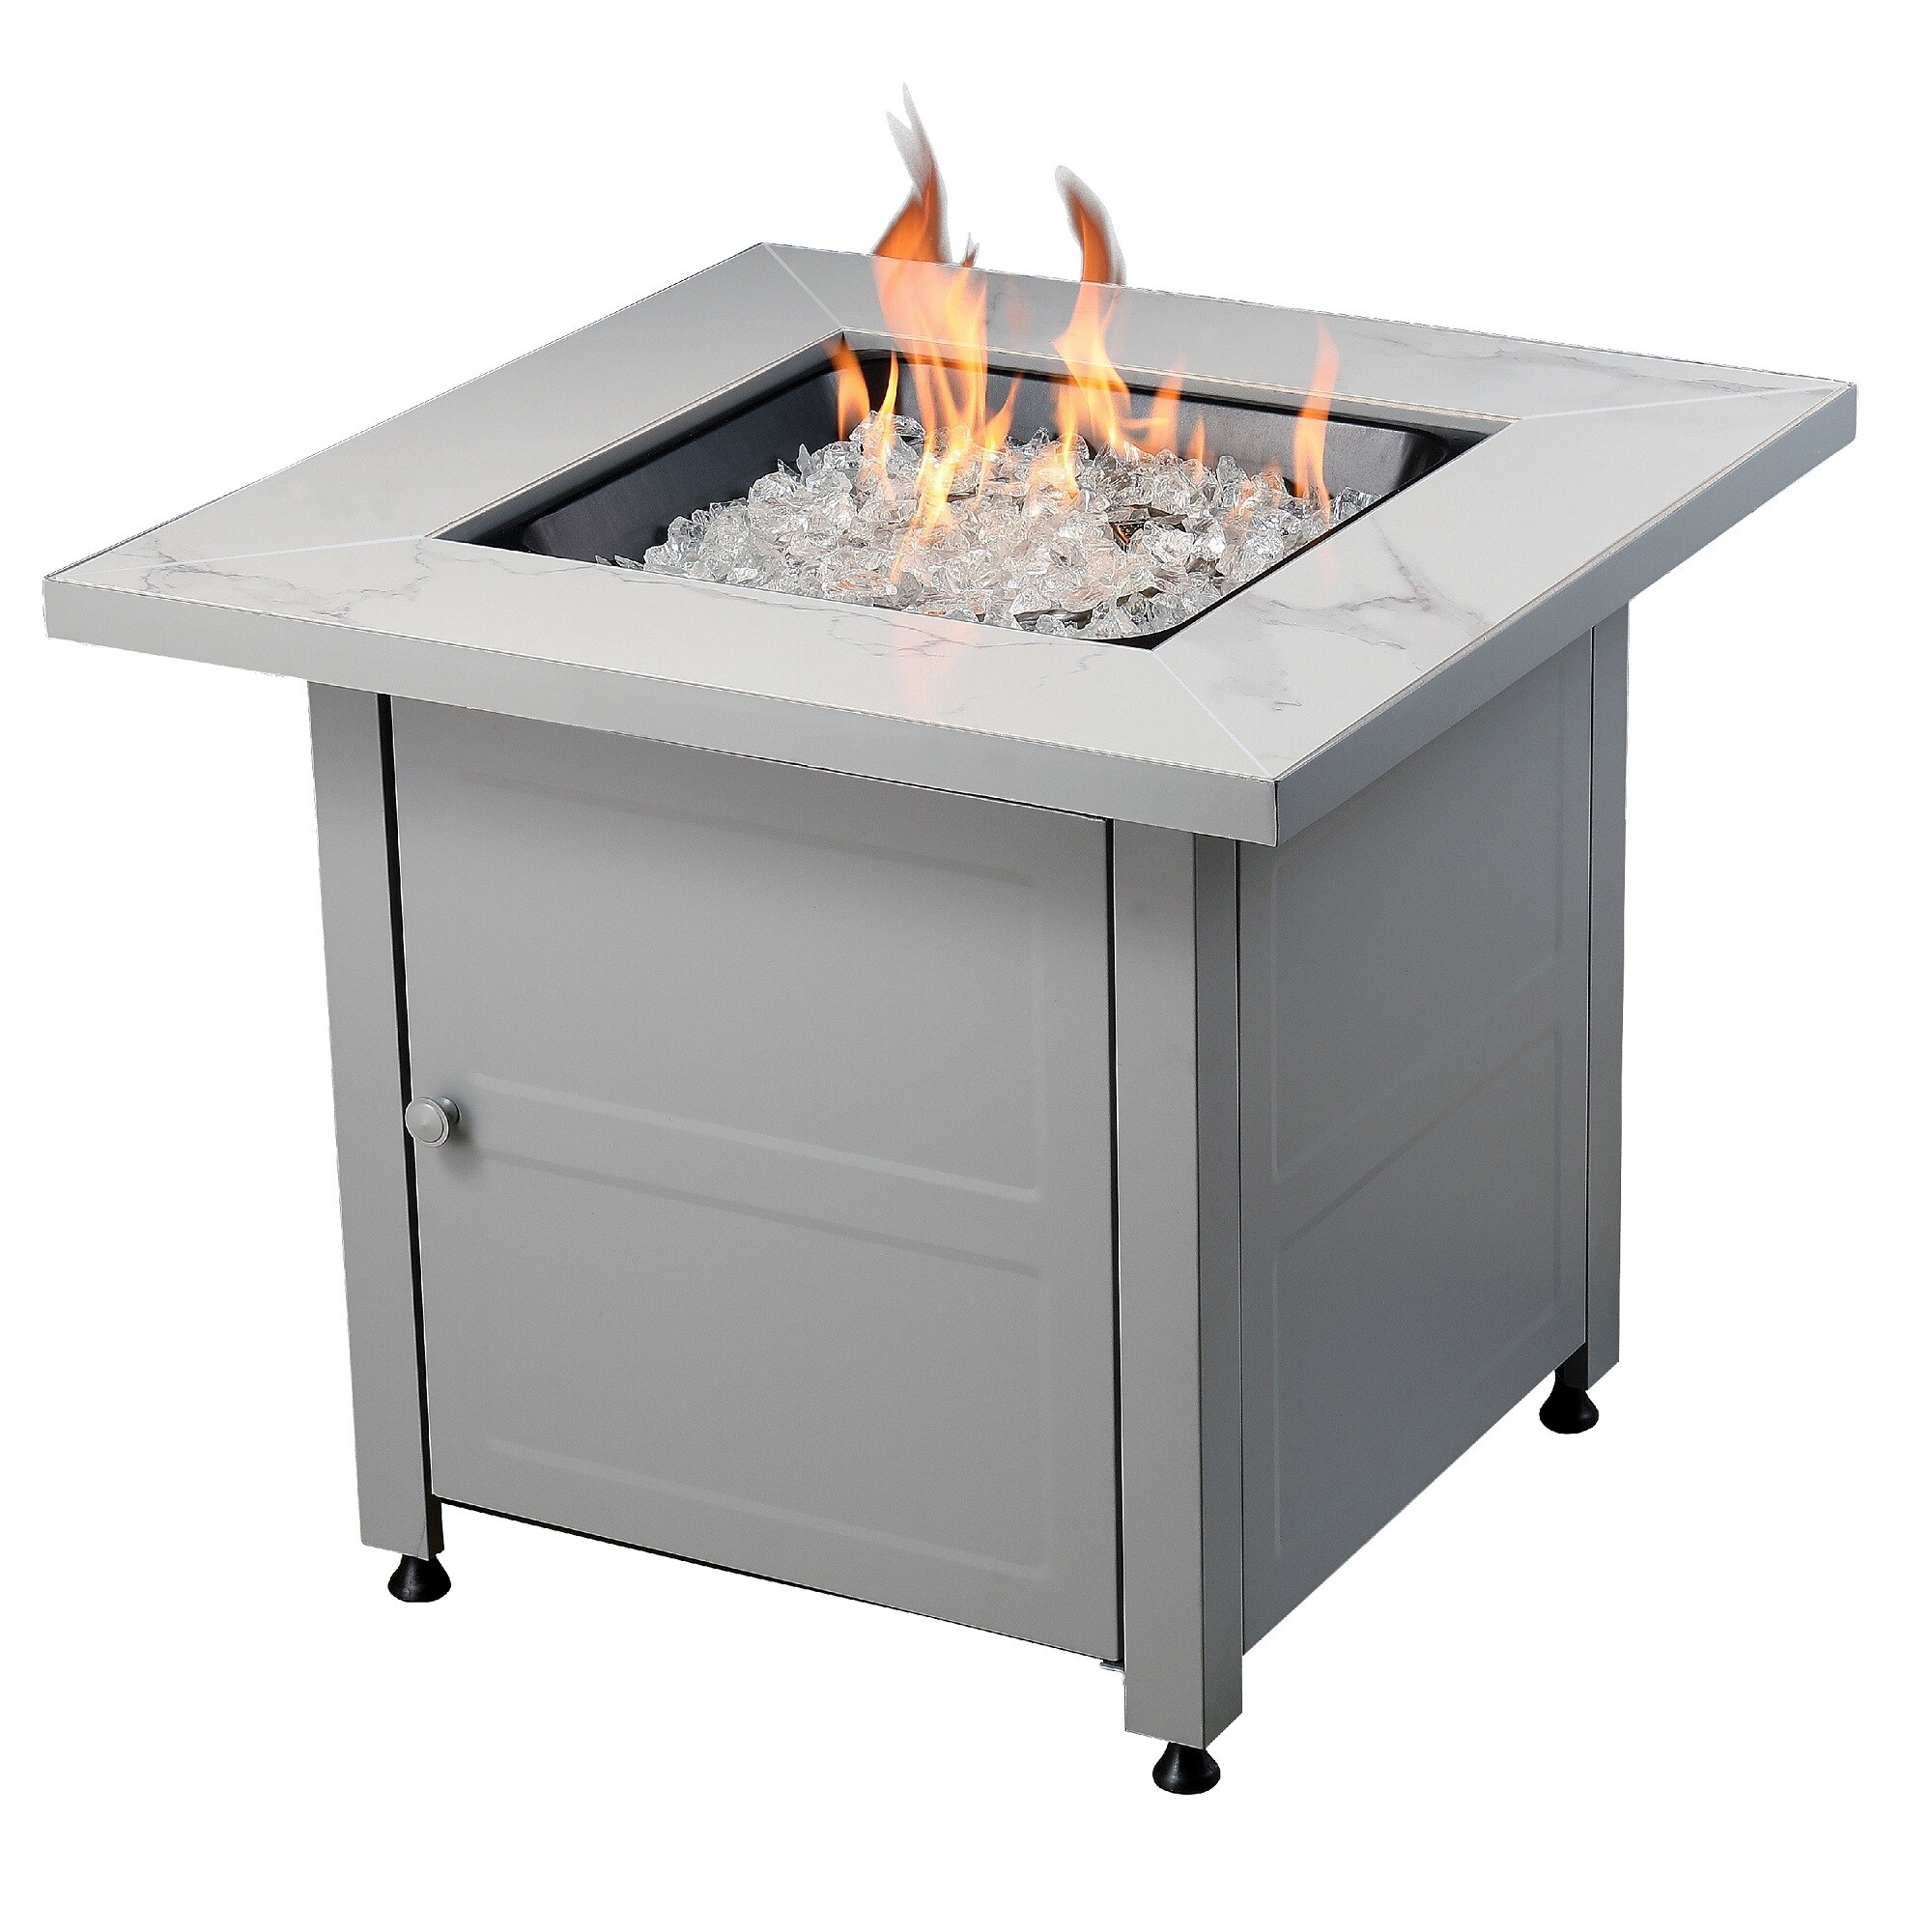 Propane Gas Fire Pit Table, Hayneedle Fire Pit Table